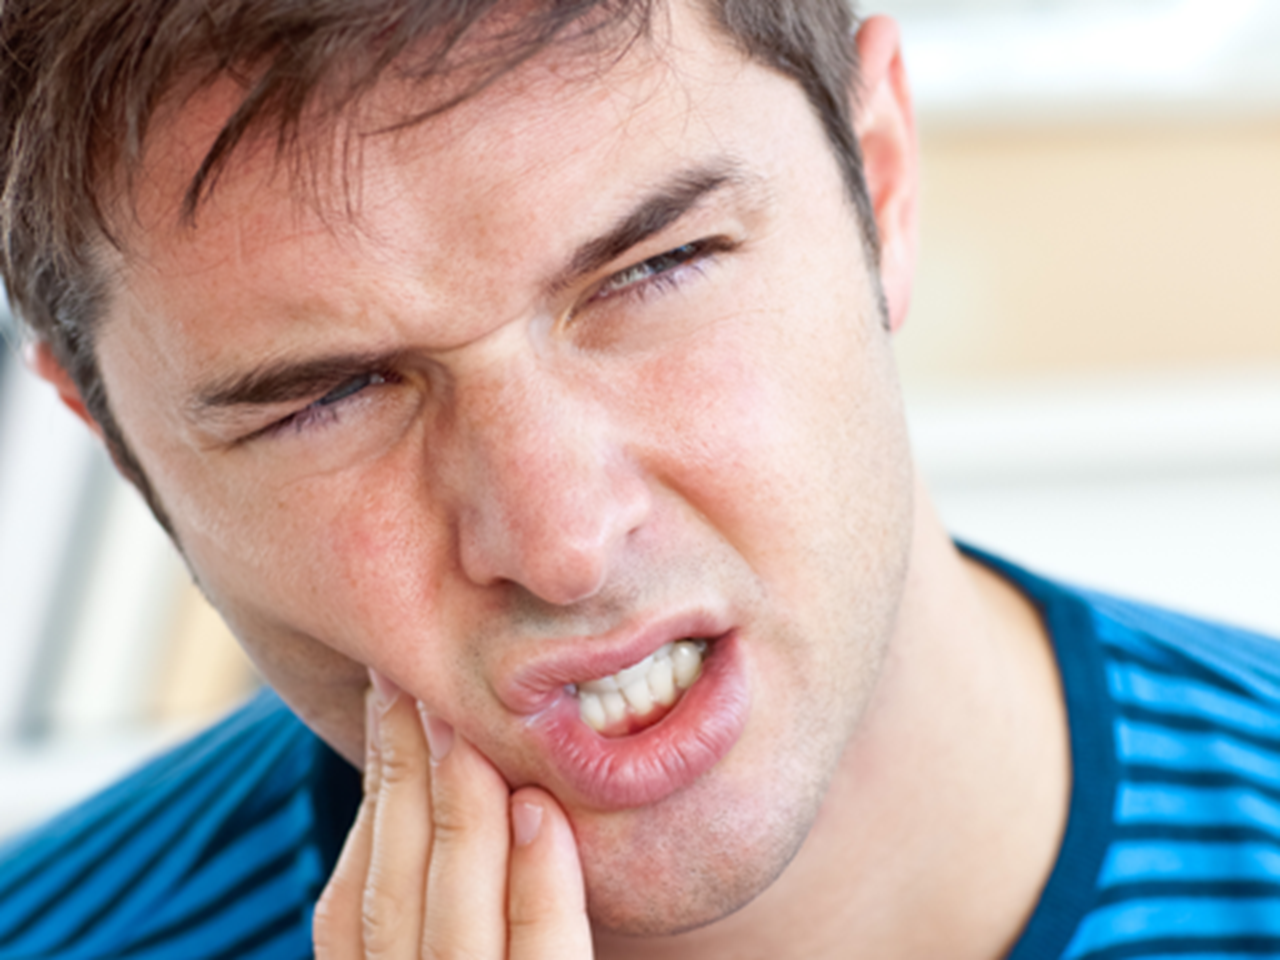 Young man grimacing with a toothache